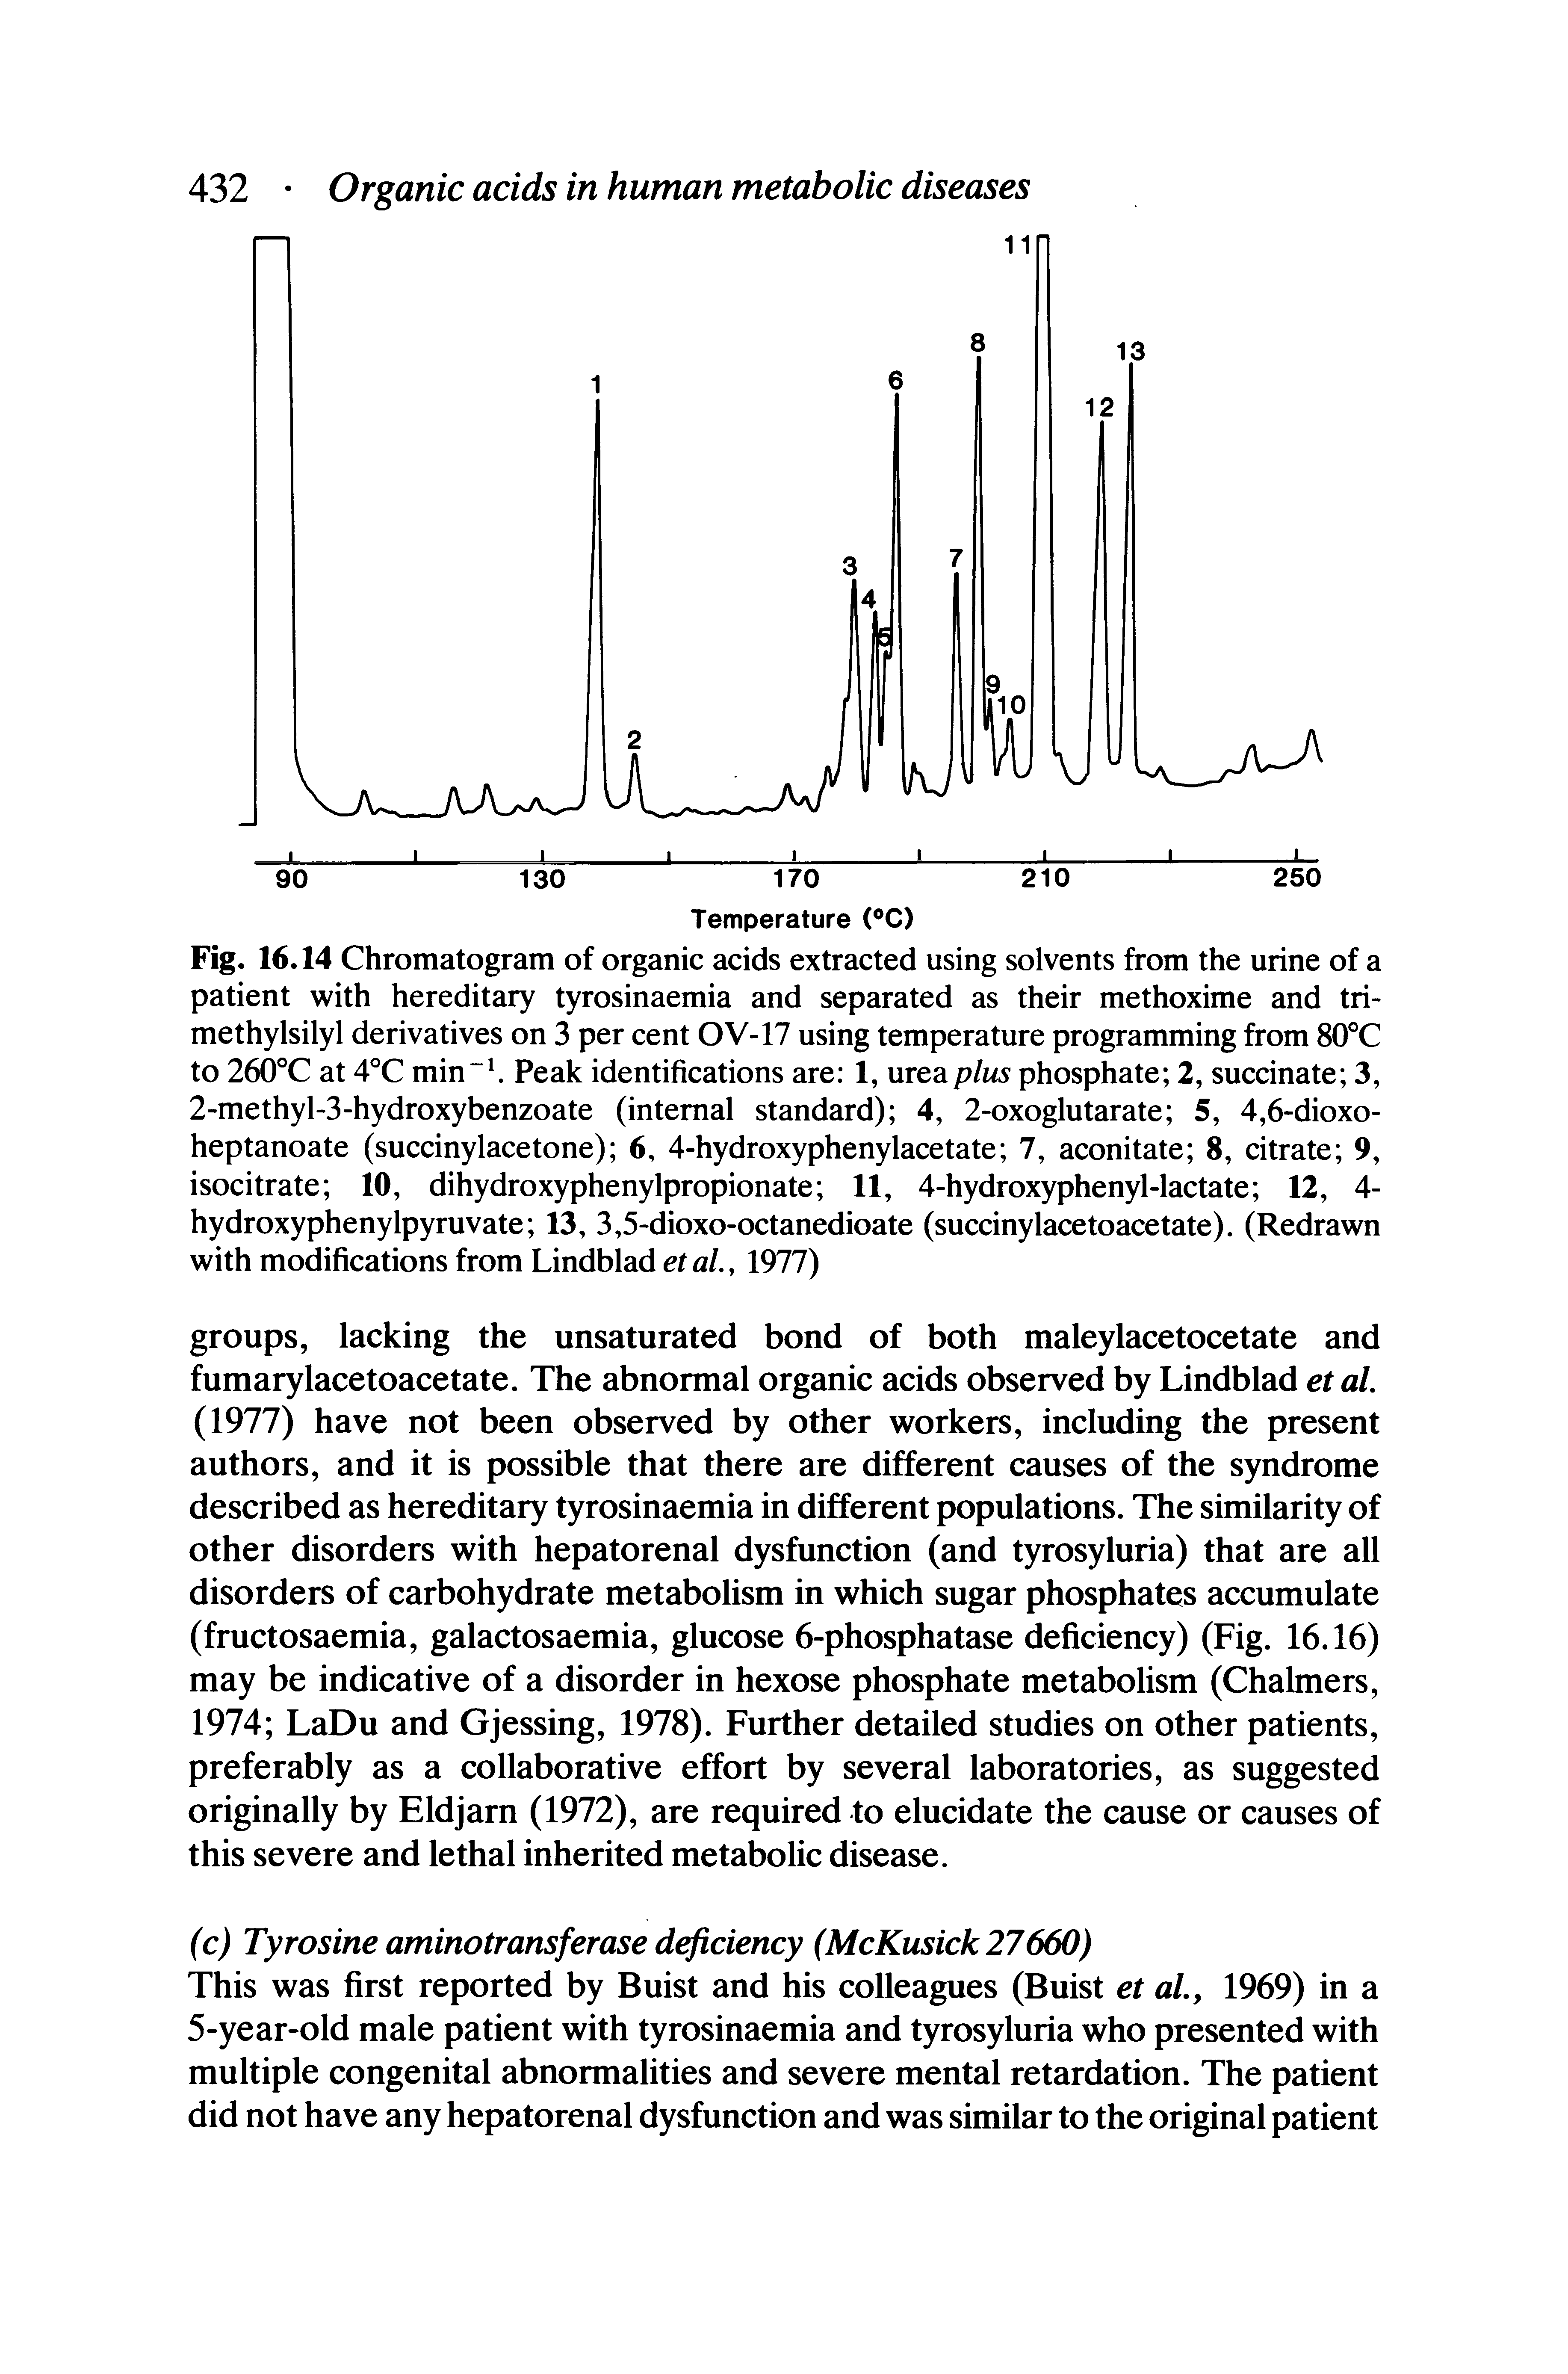 Fig. 16.14 Chromatogram of organic acids extracted using solvents from the urine of a patient with hereditary tyrosinaemia and separated as their methoxime and tri-methylsilyl derivatives on 3 per cent OV-17 using temperature programming from 80°C to 260°C at 4°C min Peak identifications are 1, urea plus phosphate 2, succinate 3, 2-methyl-3-hydroxybenzoate (internal standard) 4, 2-oxoglutarate 5, 4,6-dioxo-heptanoate (succinylacetone) 6, 4-hydroxyphenylacetate 7, aconitate 8, citrate 9, isocitrate 10, dihydroxyphenylpropionate 11, 4-hydroxyphenyl-lactate 12, 4-hydroxyphenylpyruvate 13, 3,5-dioxo-octanedioate (succinylacetoacetate). (Redrawn with modifications from Lindblad etal, 1977)...